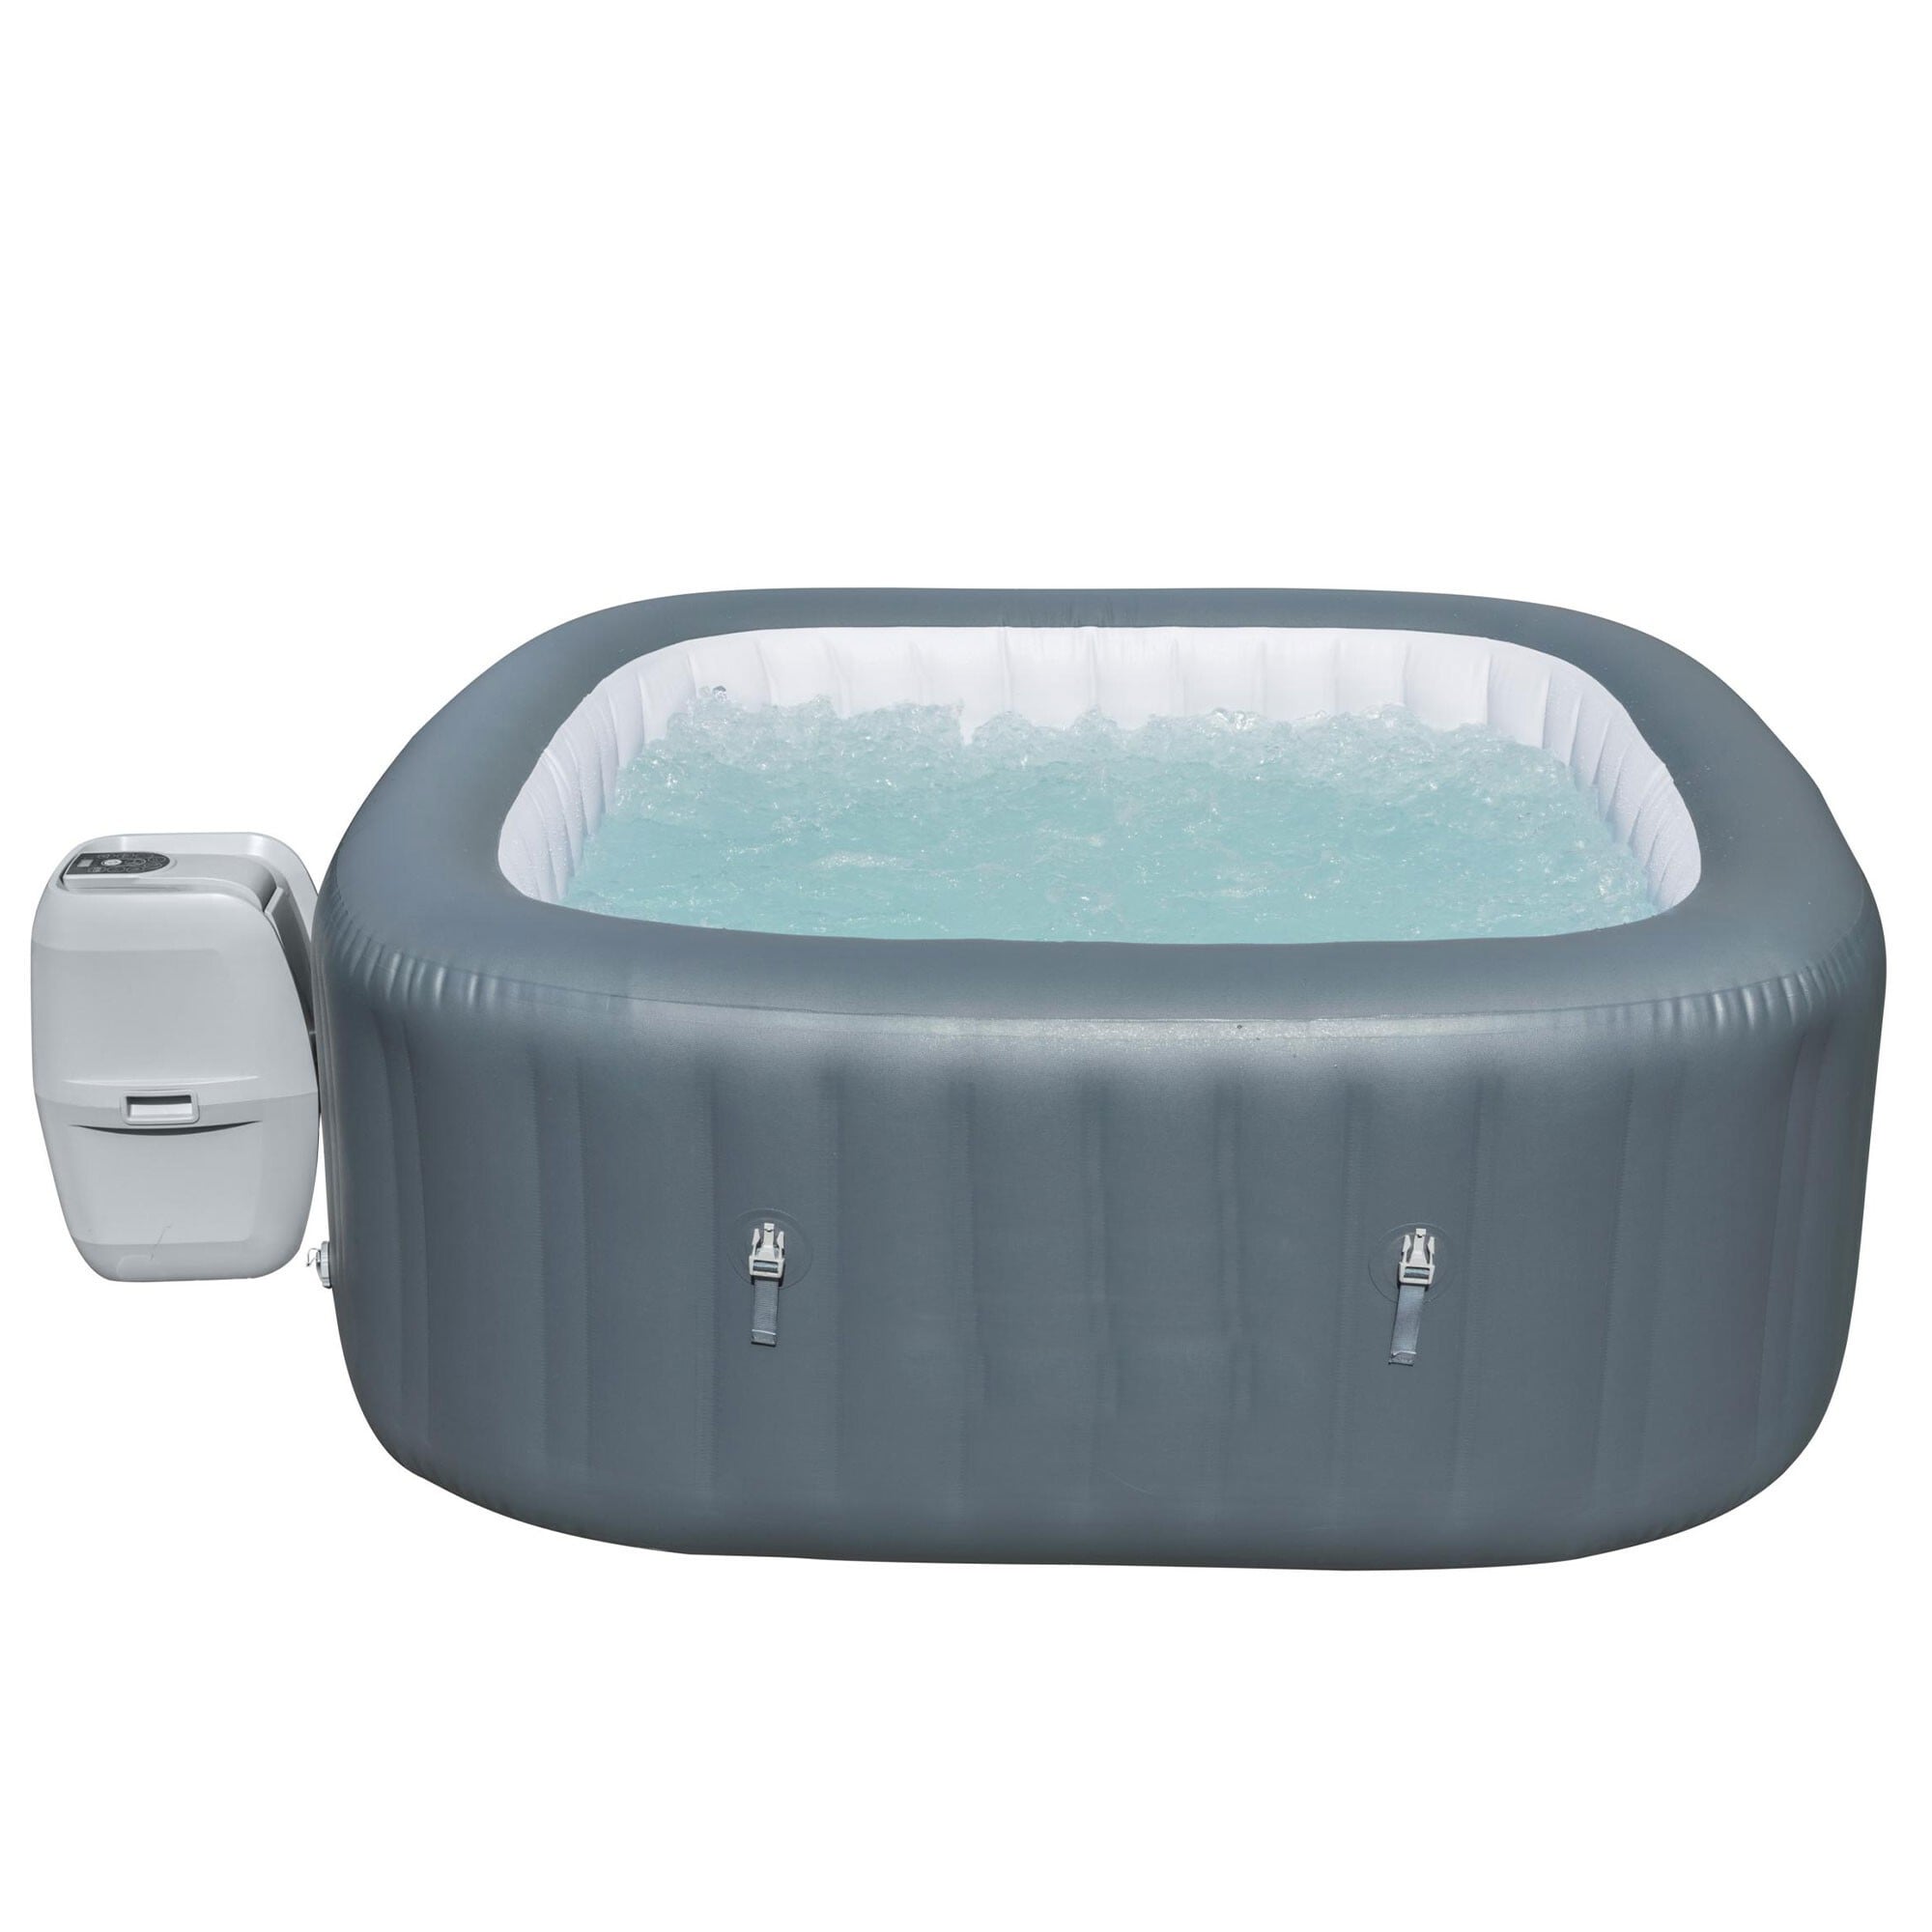 department Hot Tub & in Inflatable Tubs 4-Person 28-in Hot at Bestway 71-in Square the Spas x